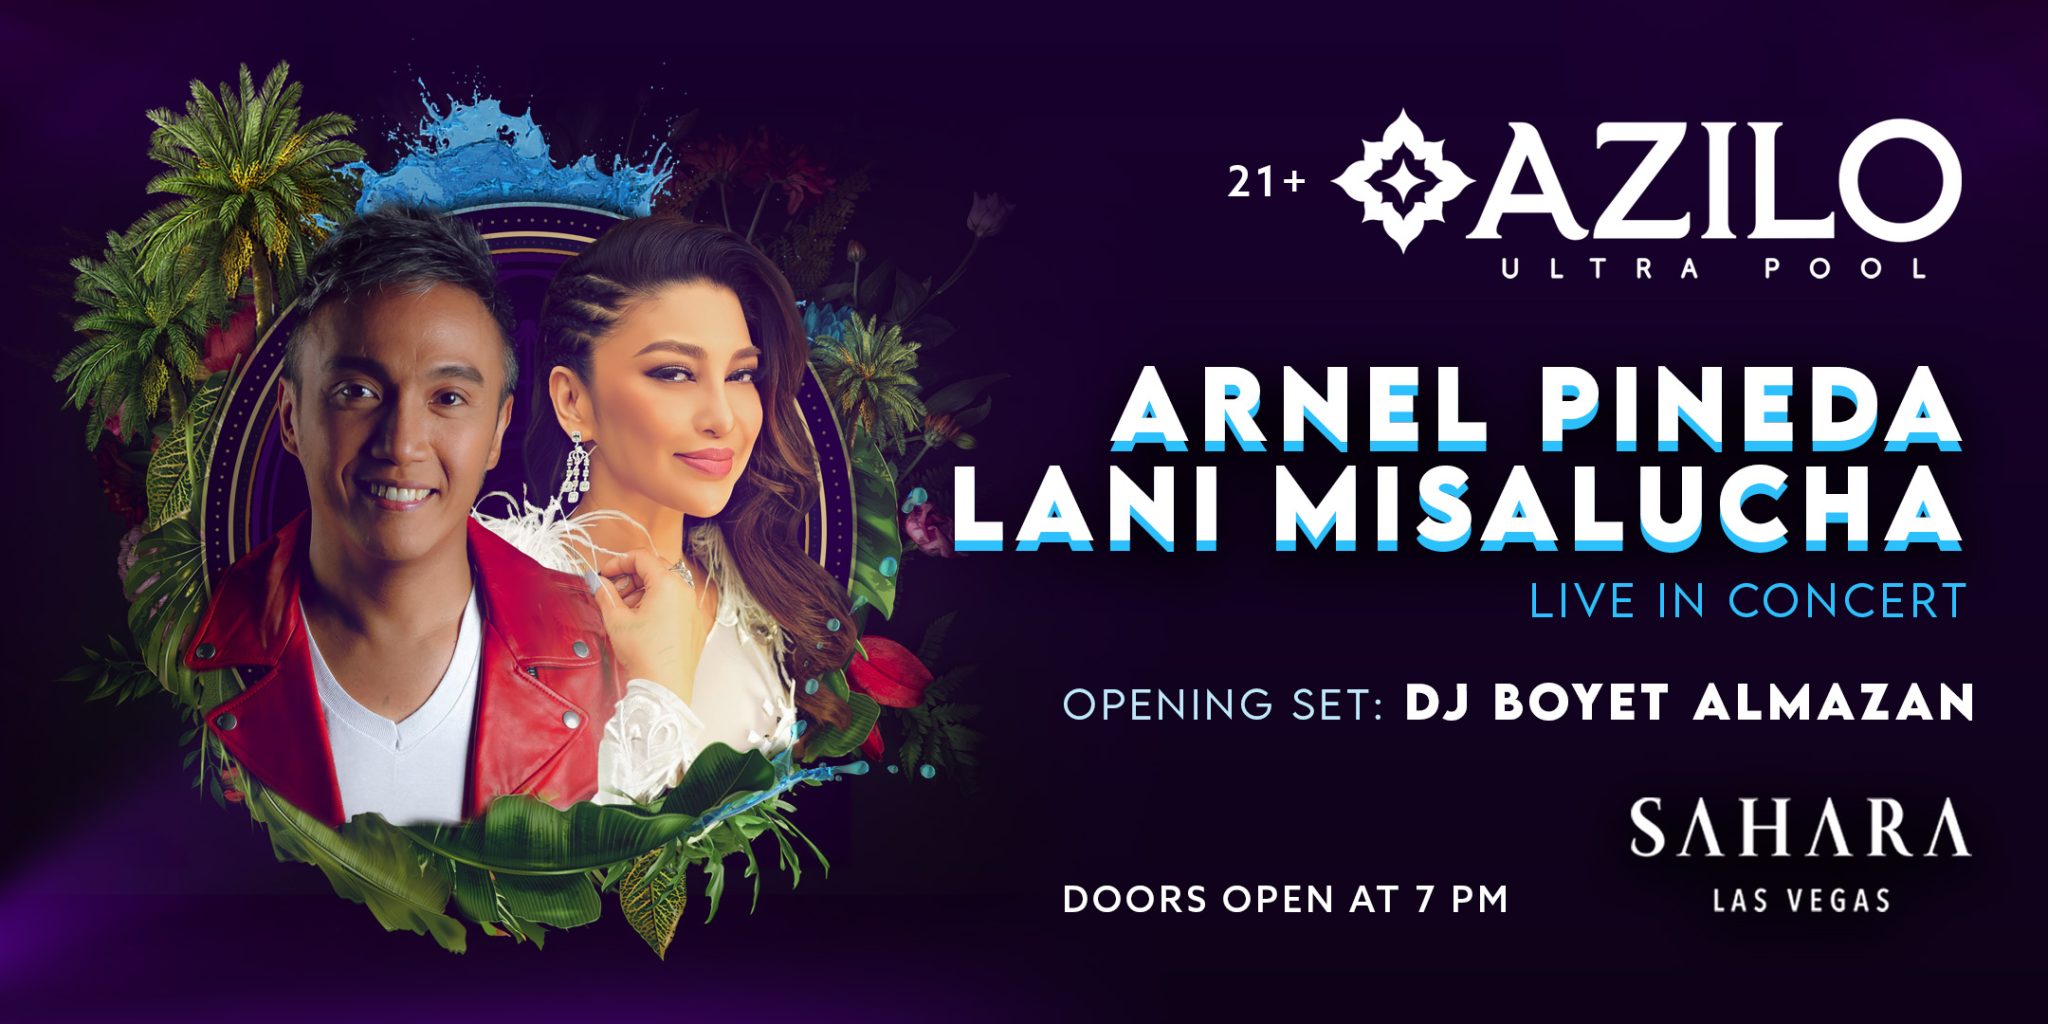 Arnel and Lani creative to support the concert in September. Shows a tropical vibe with the artists.